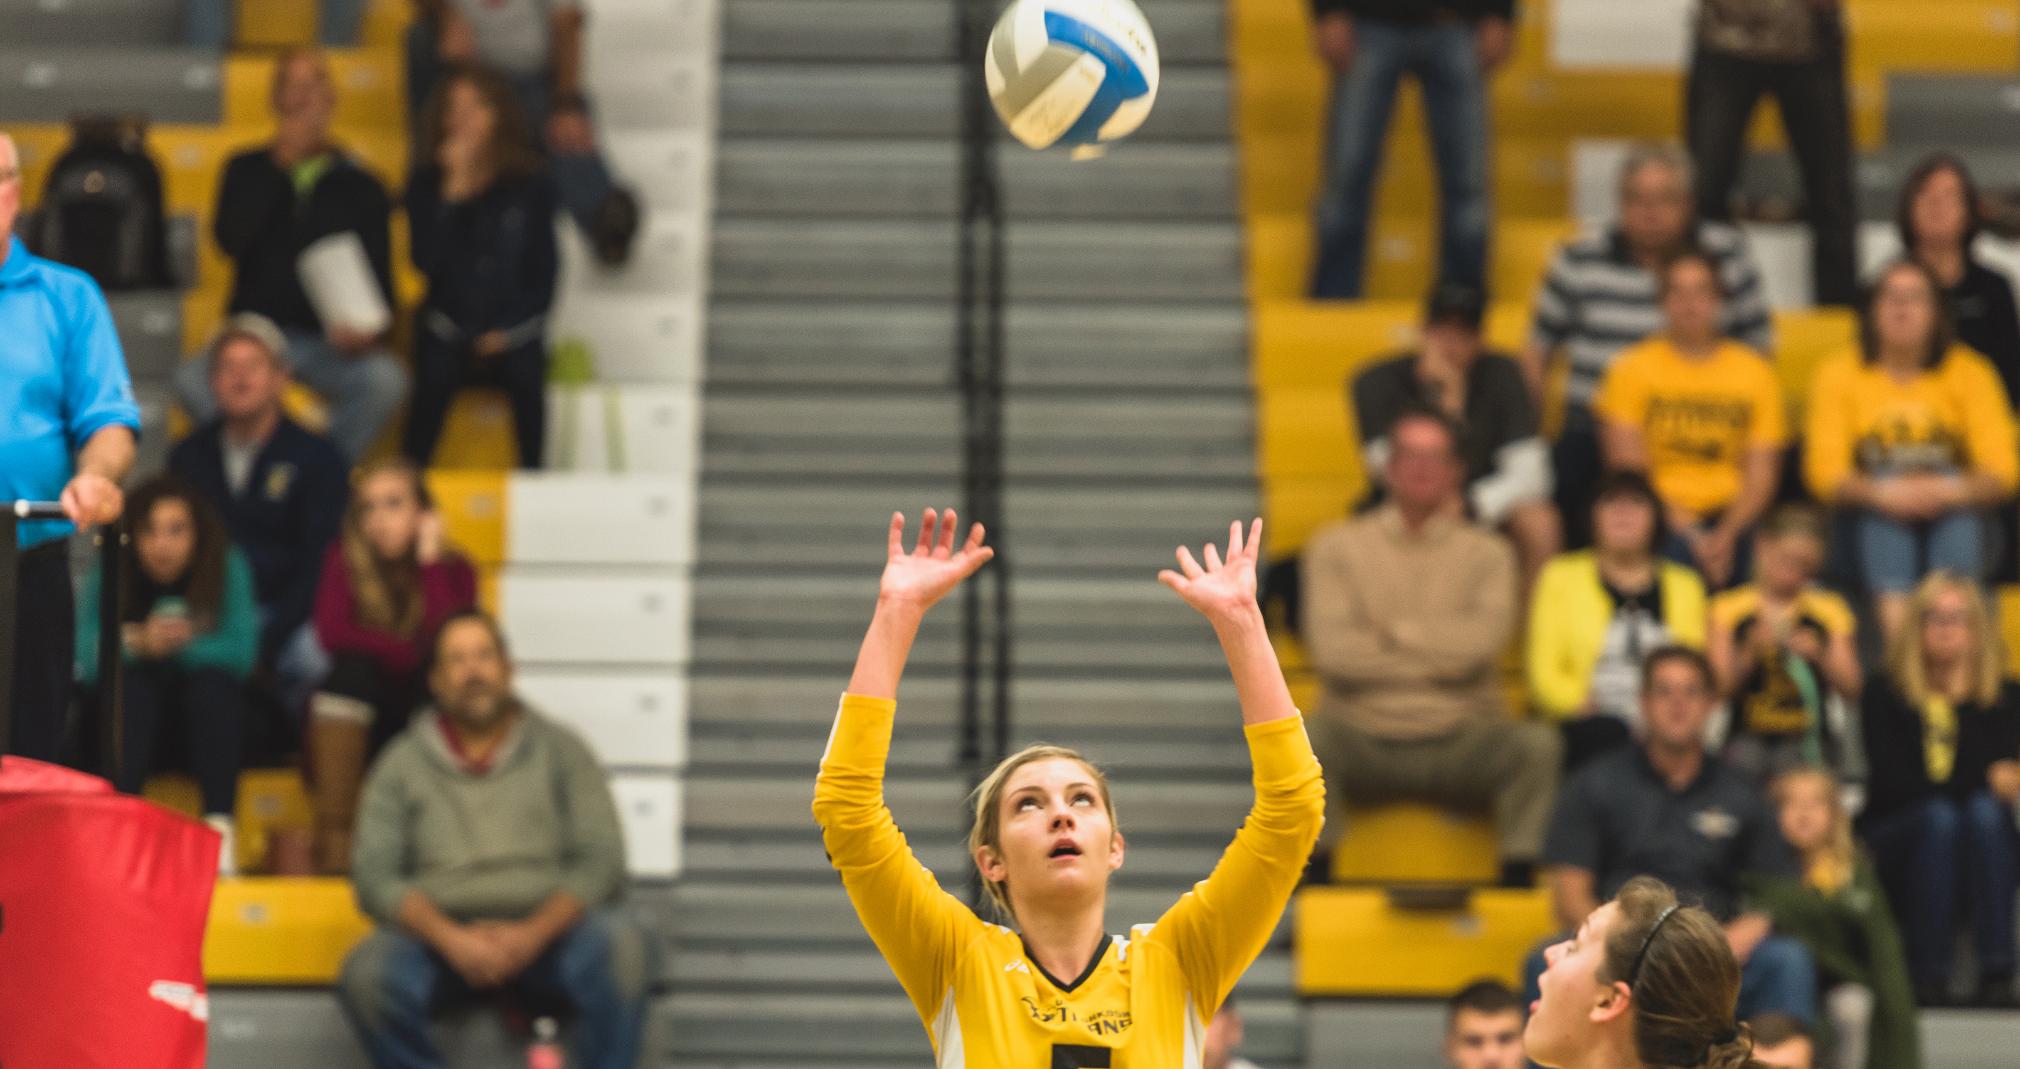 Lexi Thiel notched her 32nd career double-double with 32 assists and 10 digs against Carroll University.